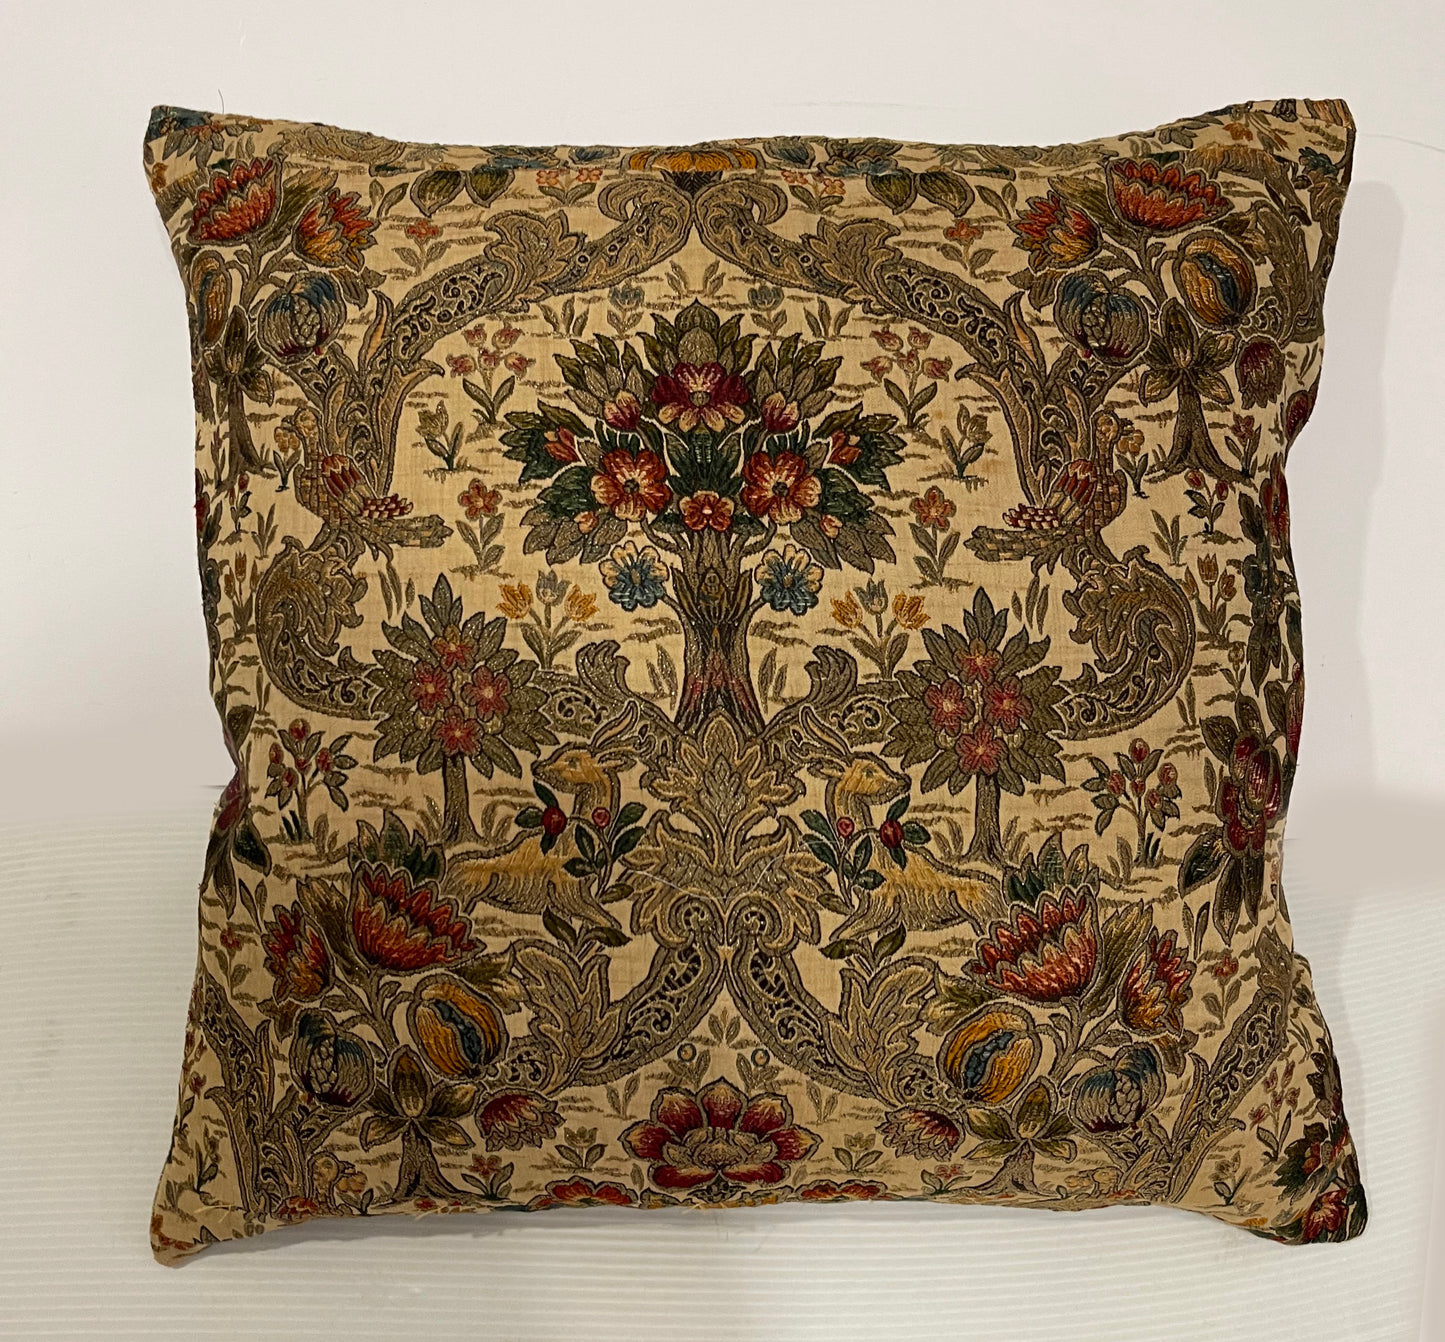 18th Century French Brocade Pillow